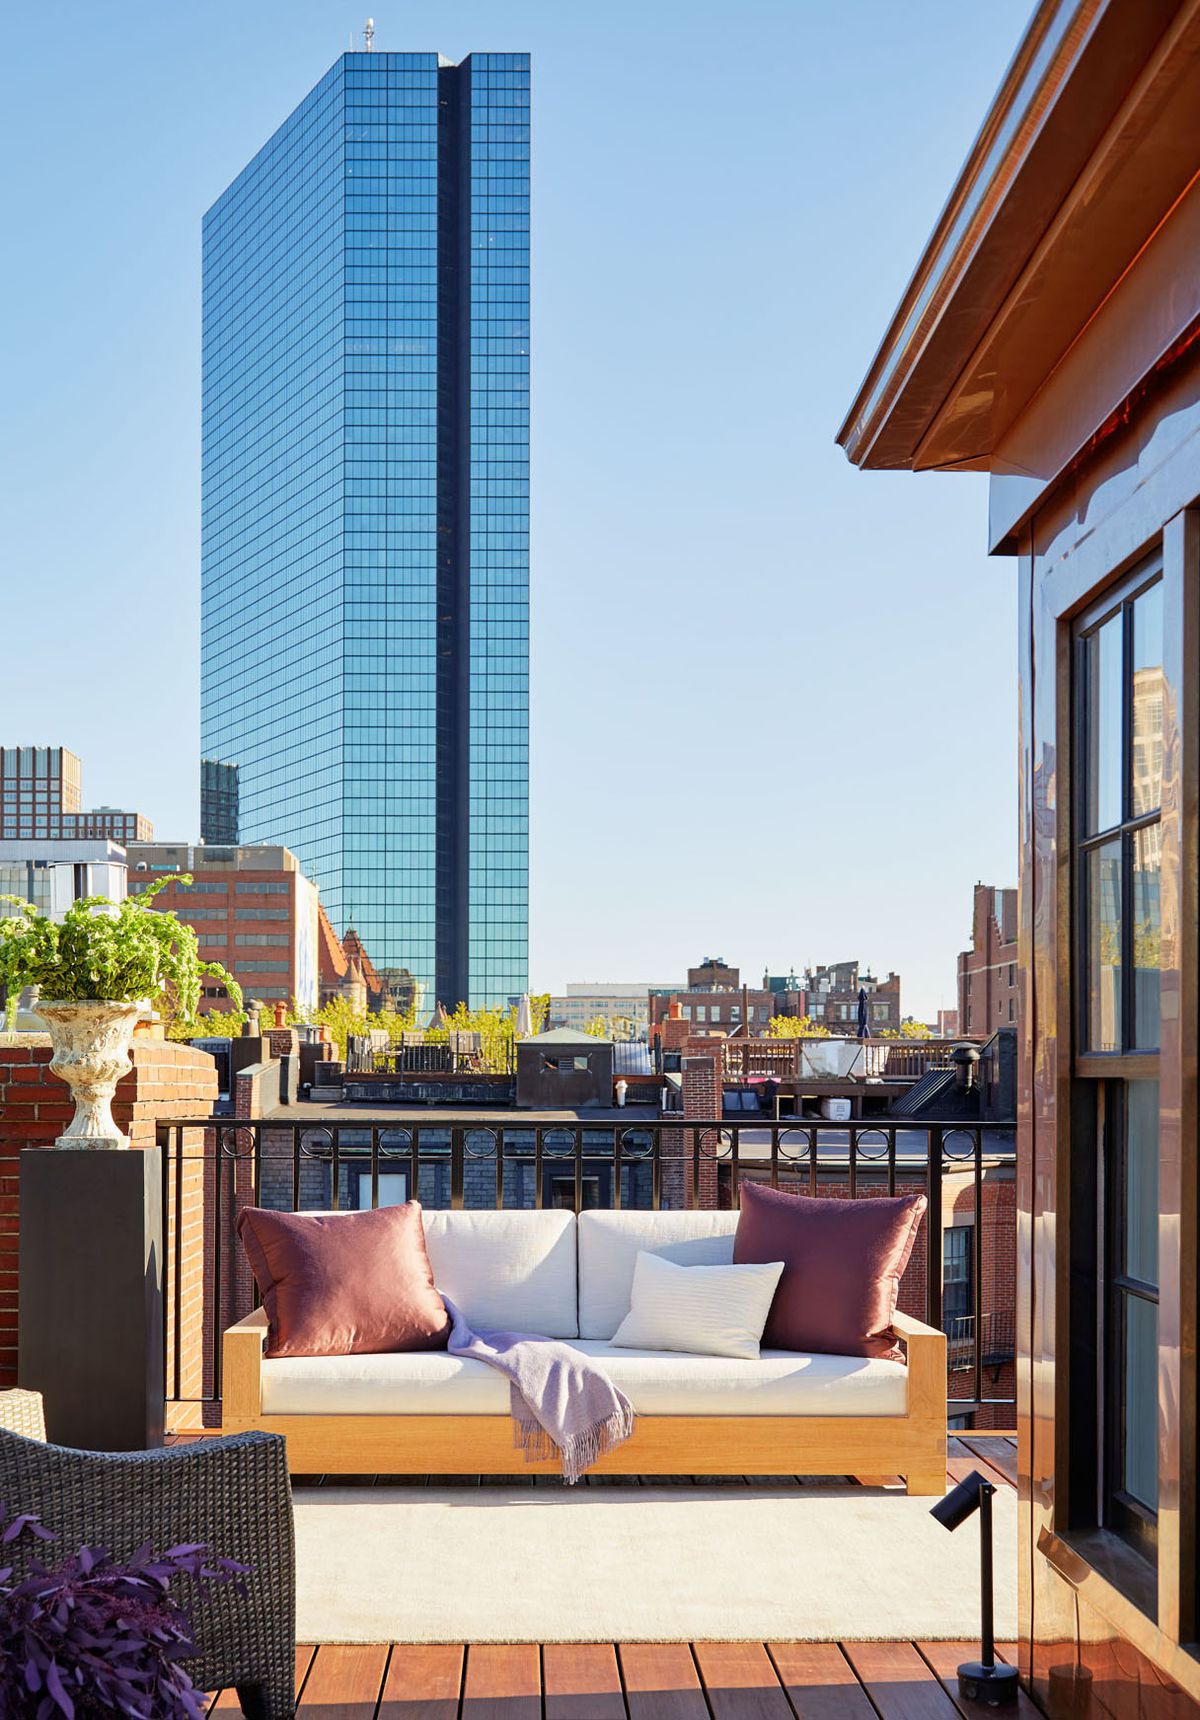 A sun-drenched view of a modern, outdoor loveseat with throw pillows on a private roof deck. A large shiny skyscraper is visible in the background.